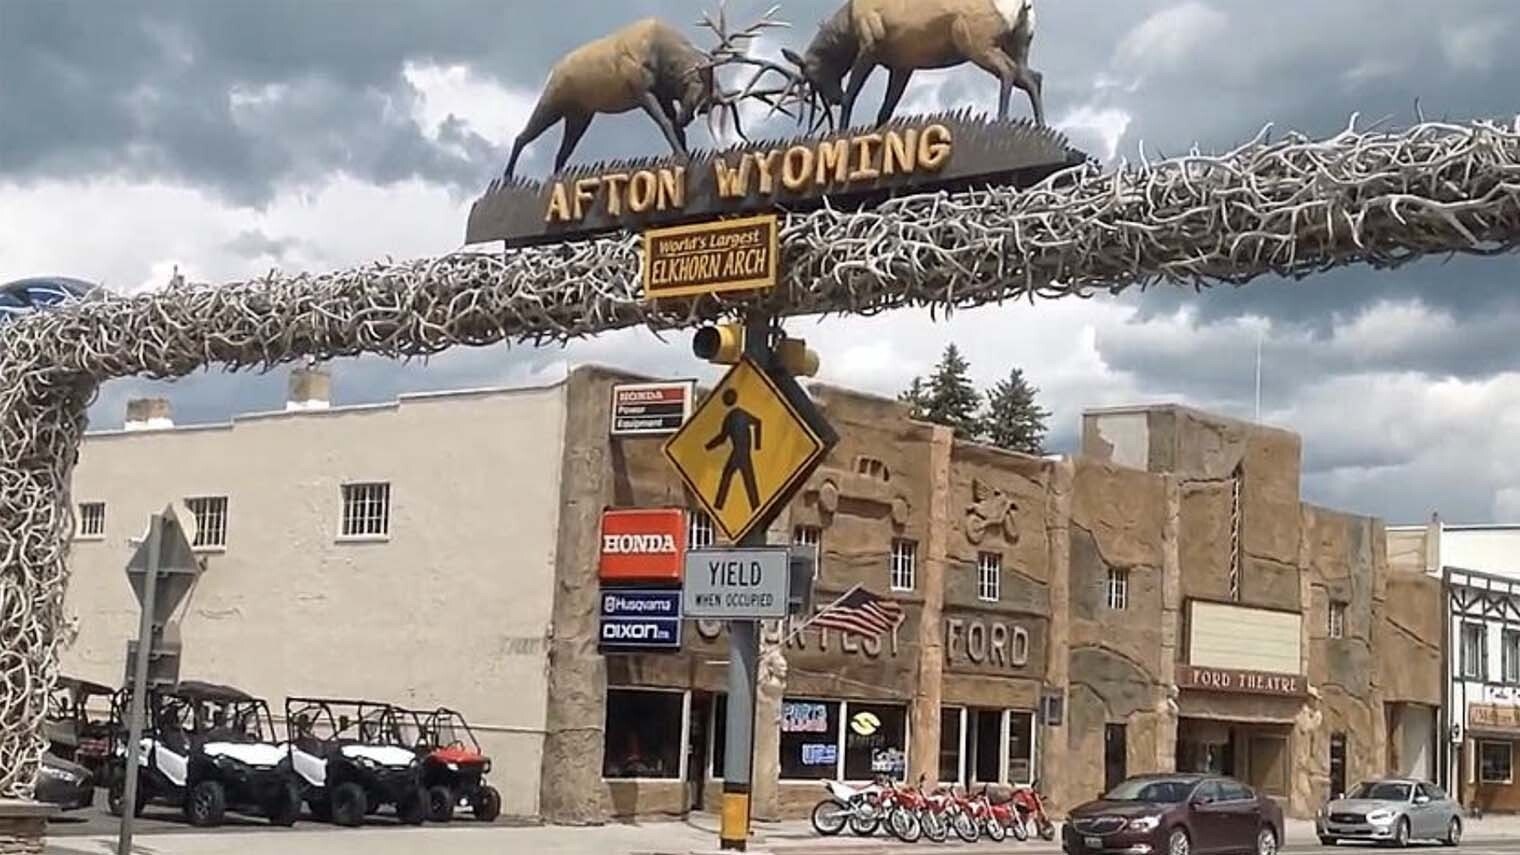 Afton wyoming arch